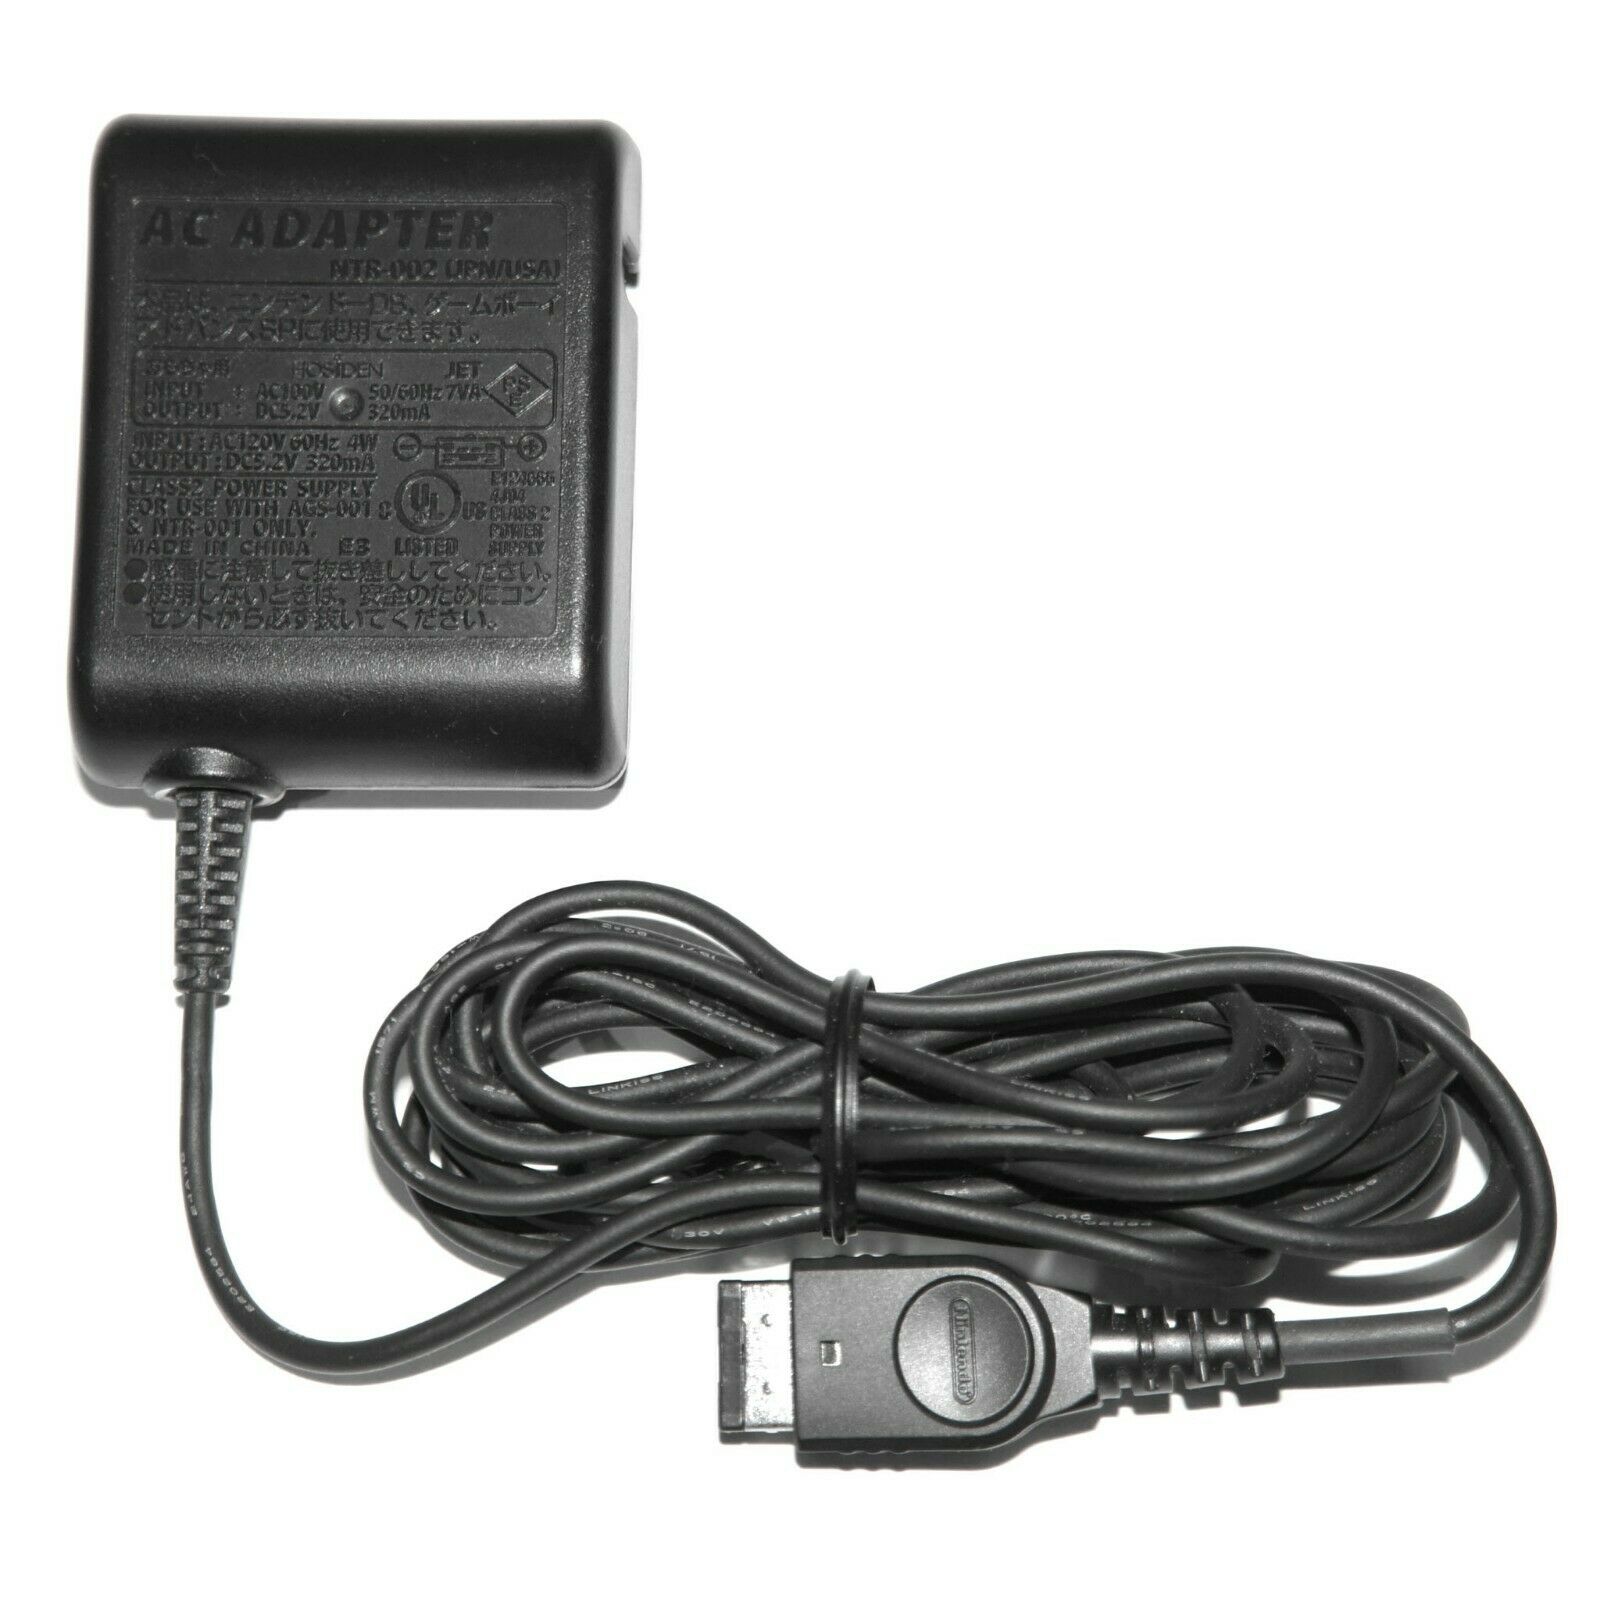 Nintendo NTR-001 Ac Adapter Power Supply Cord Cable Charger